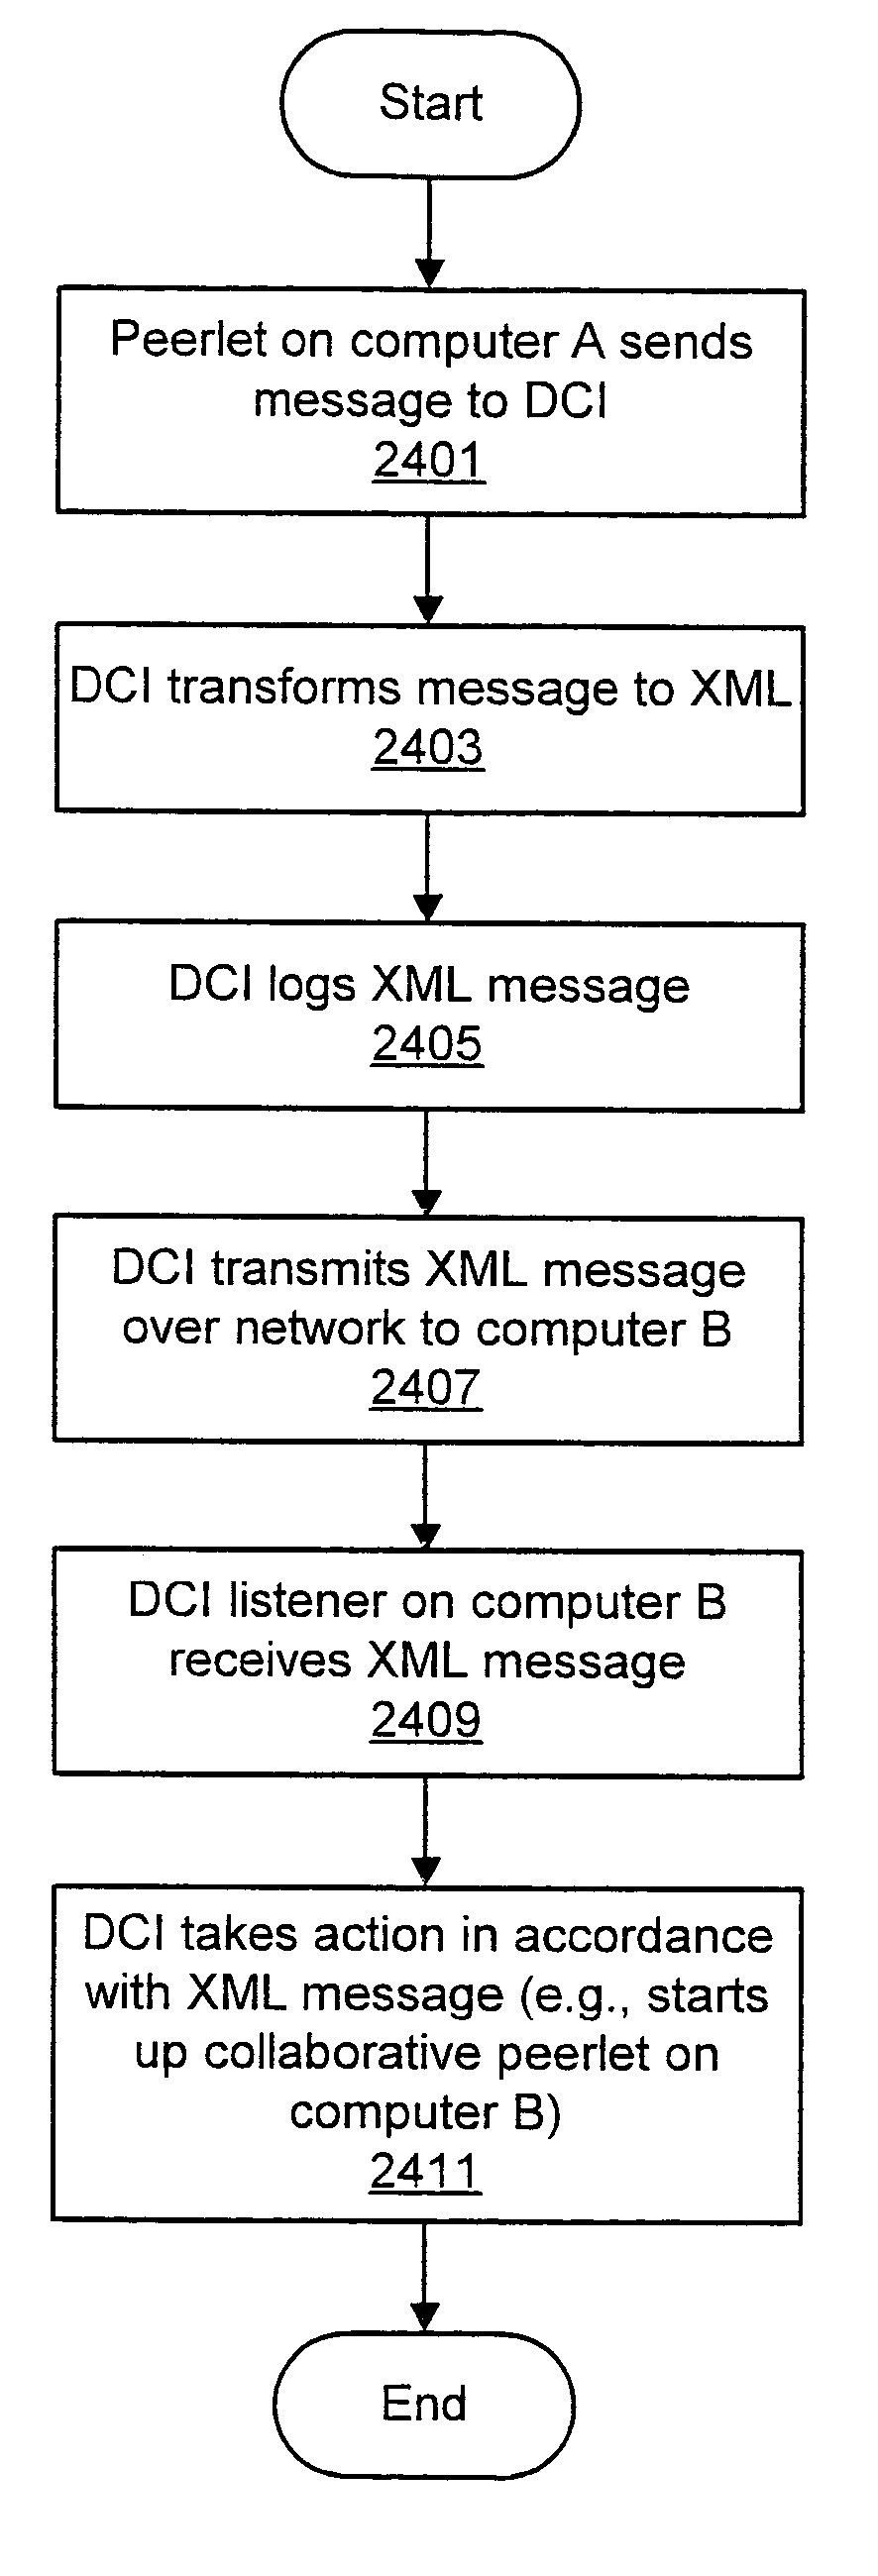 System and method for multi-functional XML-capable software applications on a peer-to-peer network